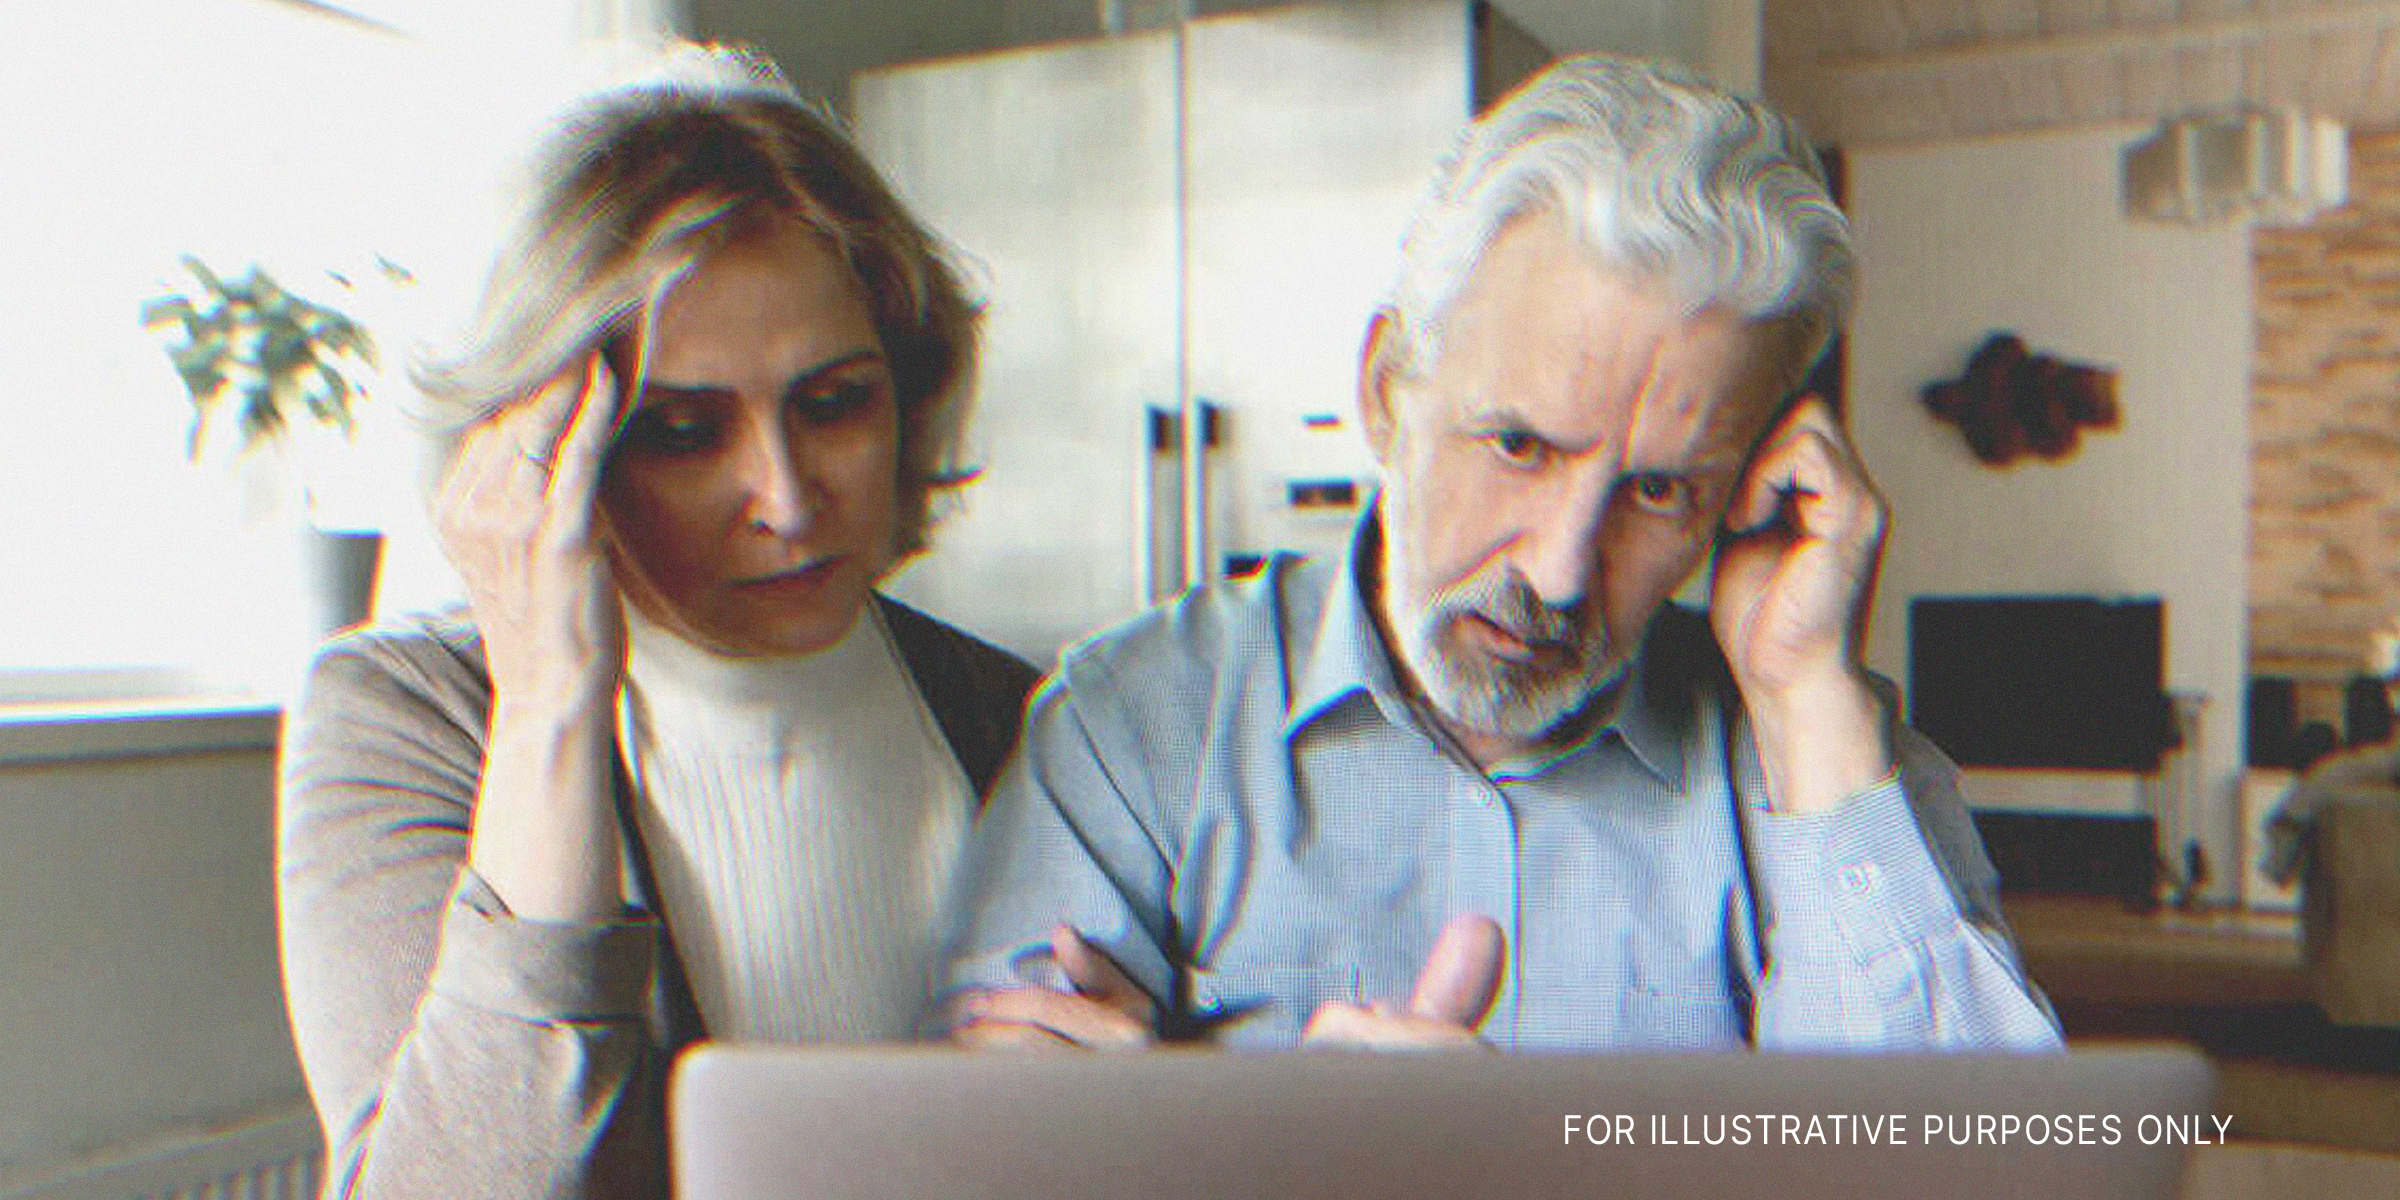 An older couple is pictured looking upset while staring at a laptop | Source: Shutterstock